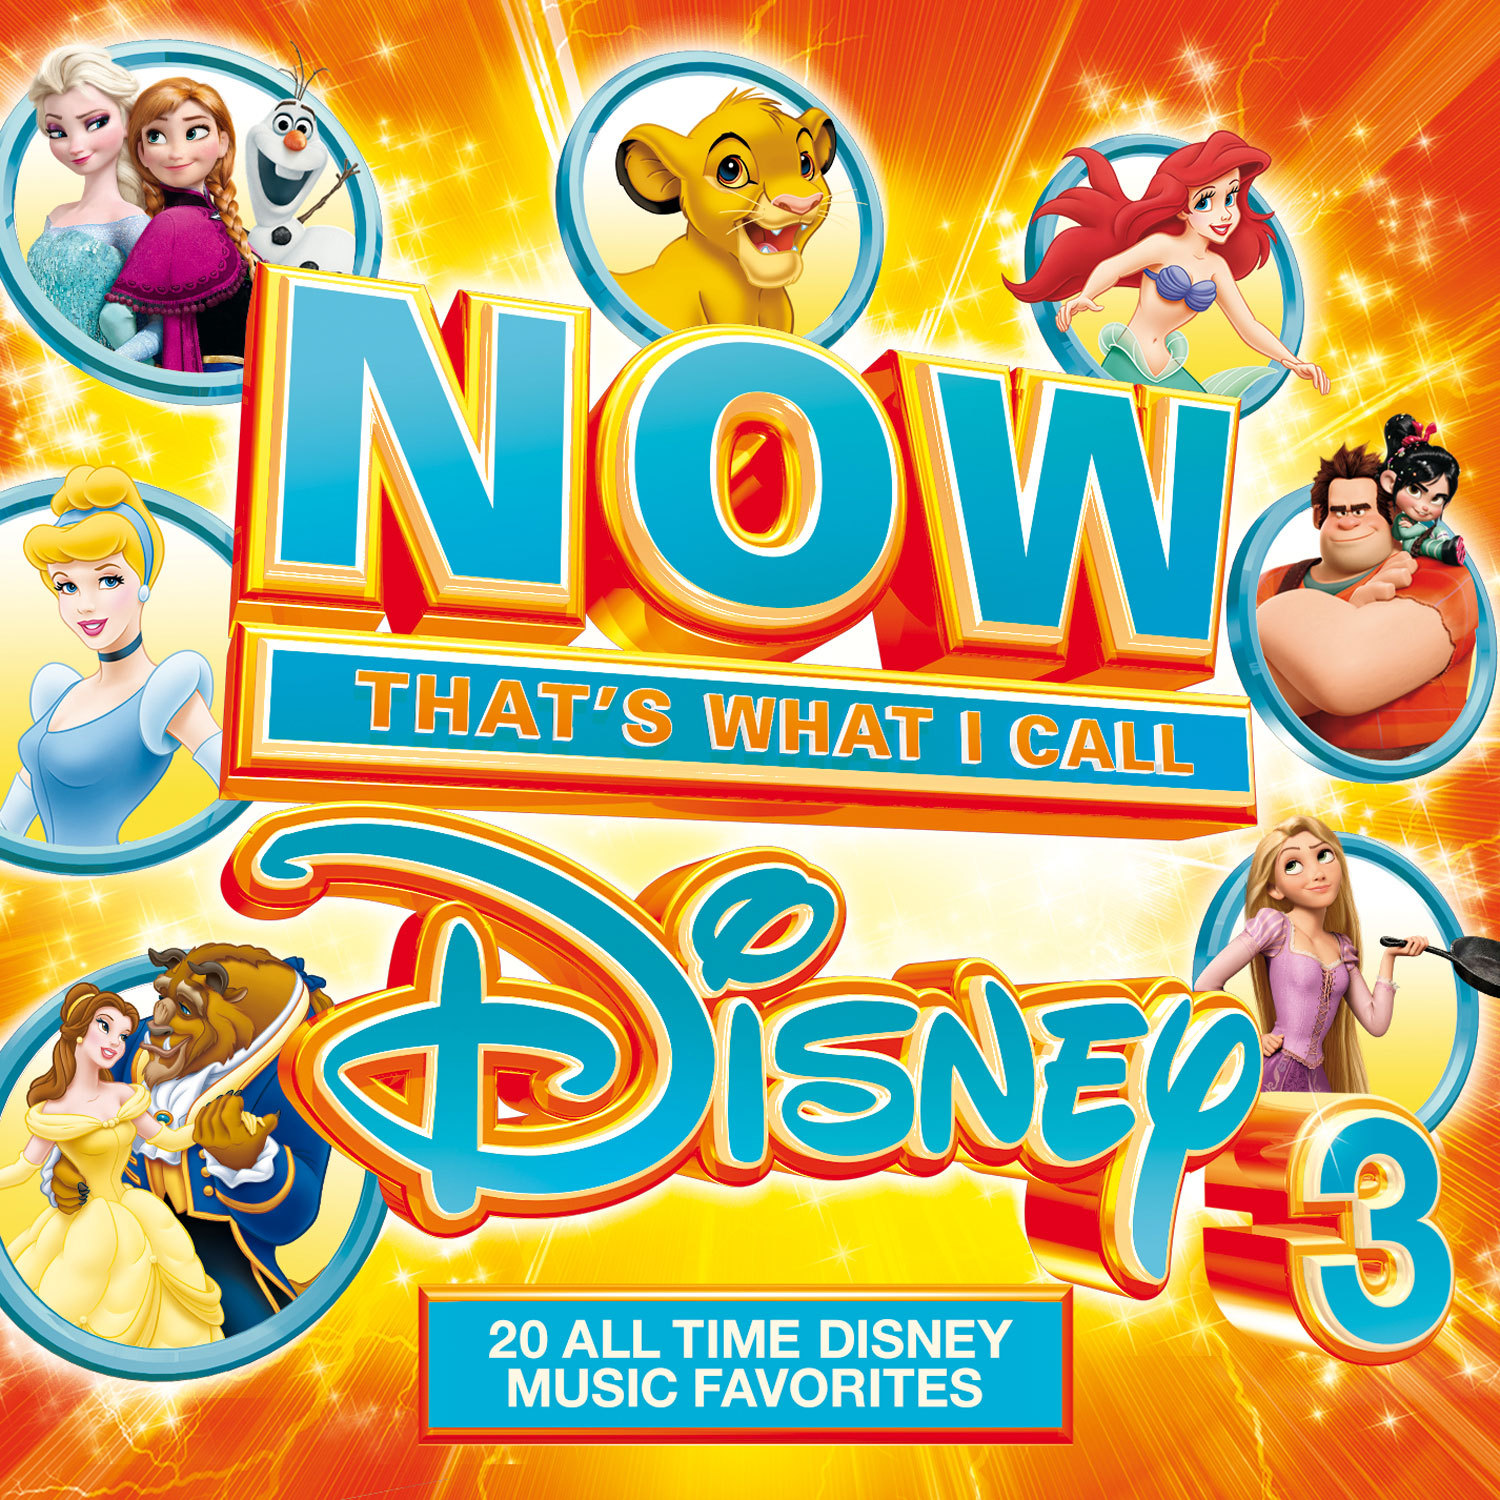 NOW That's What I Call Music! and Walt Disney Records Team for Third  Collection of Disney Music Favorites, 'NOW That's What I Call Disney 3' |  Business Wire